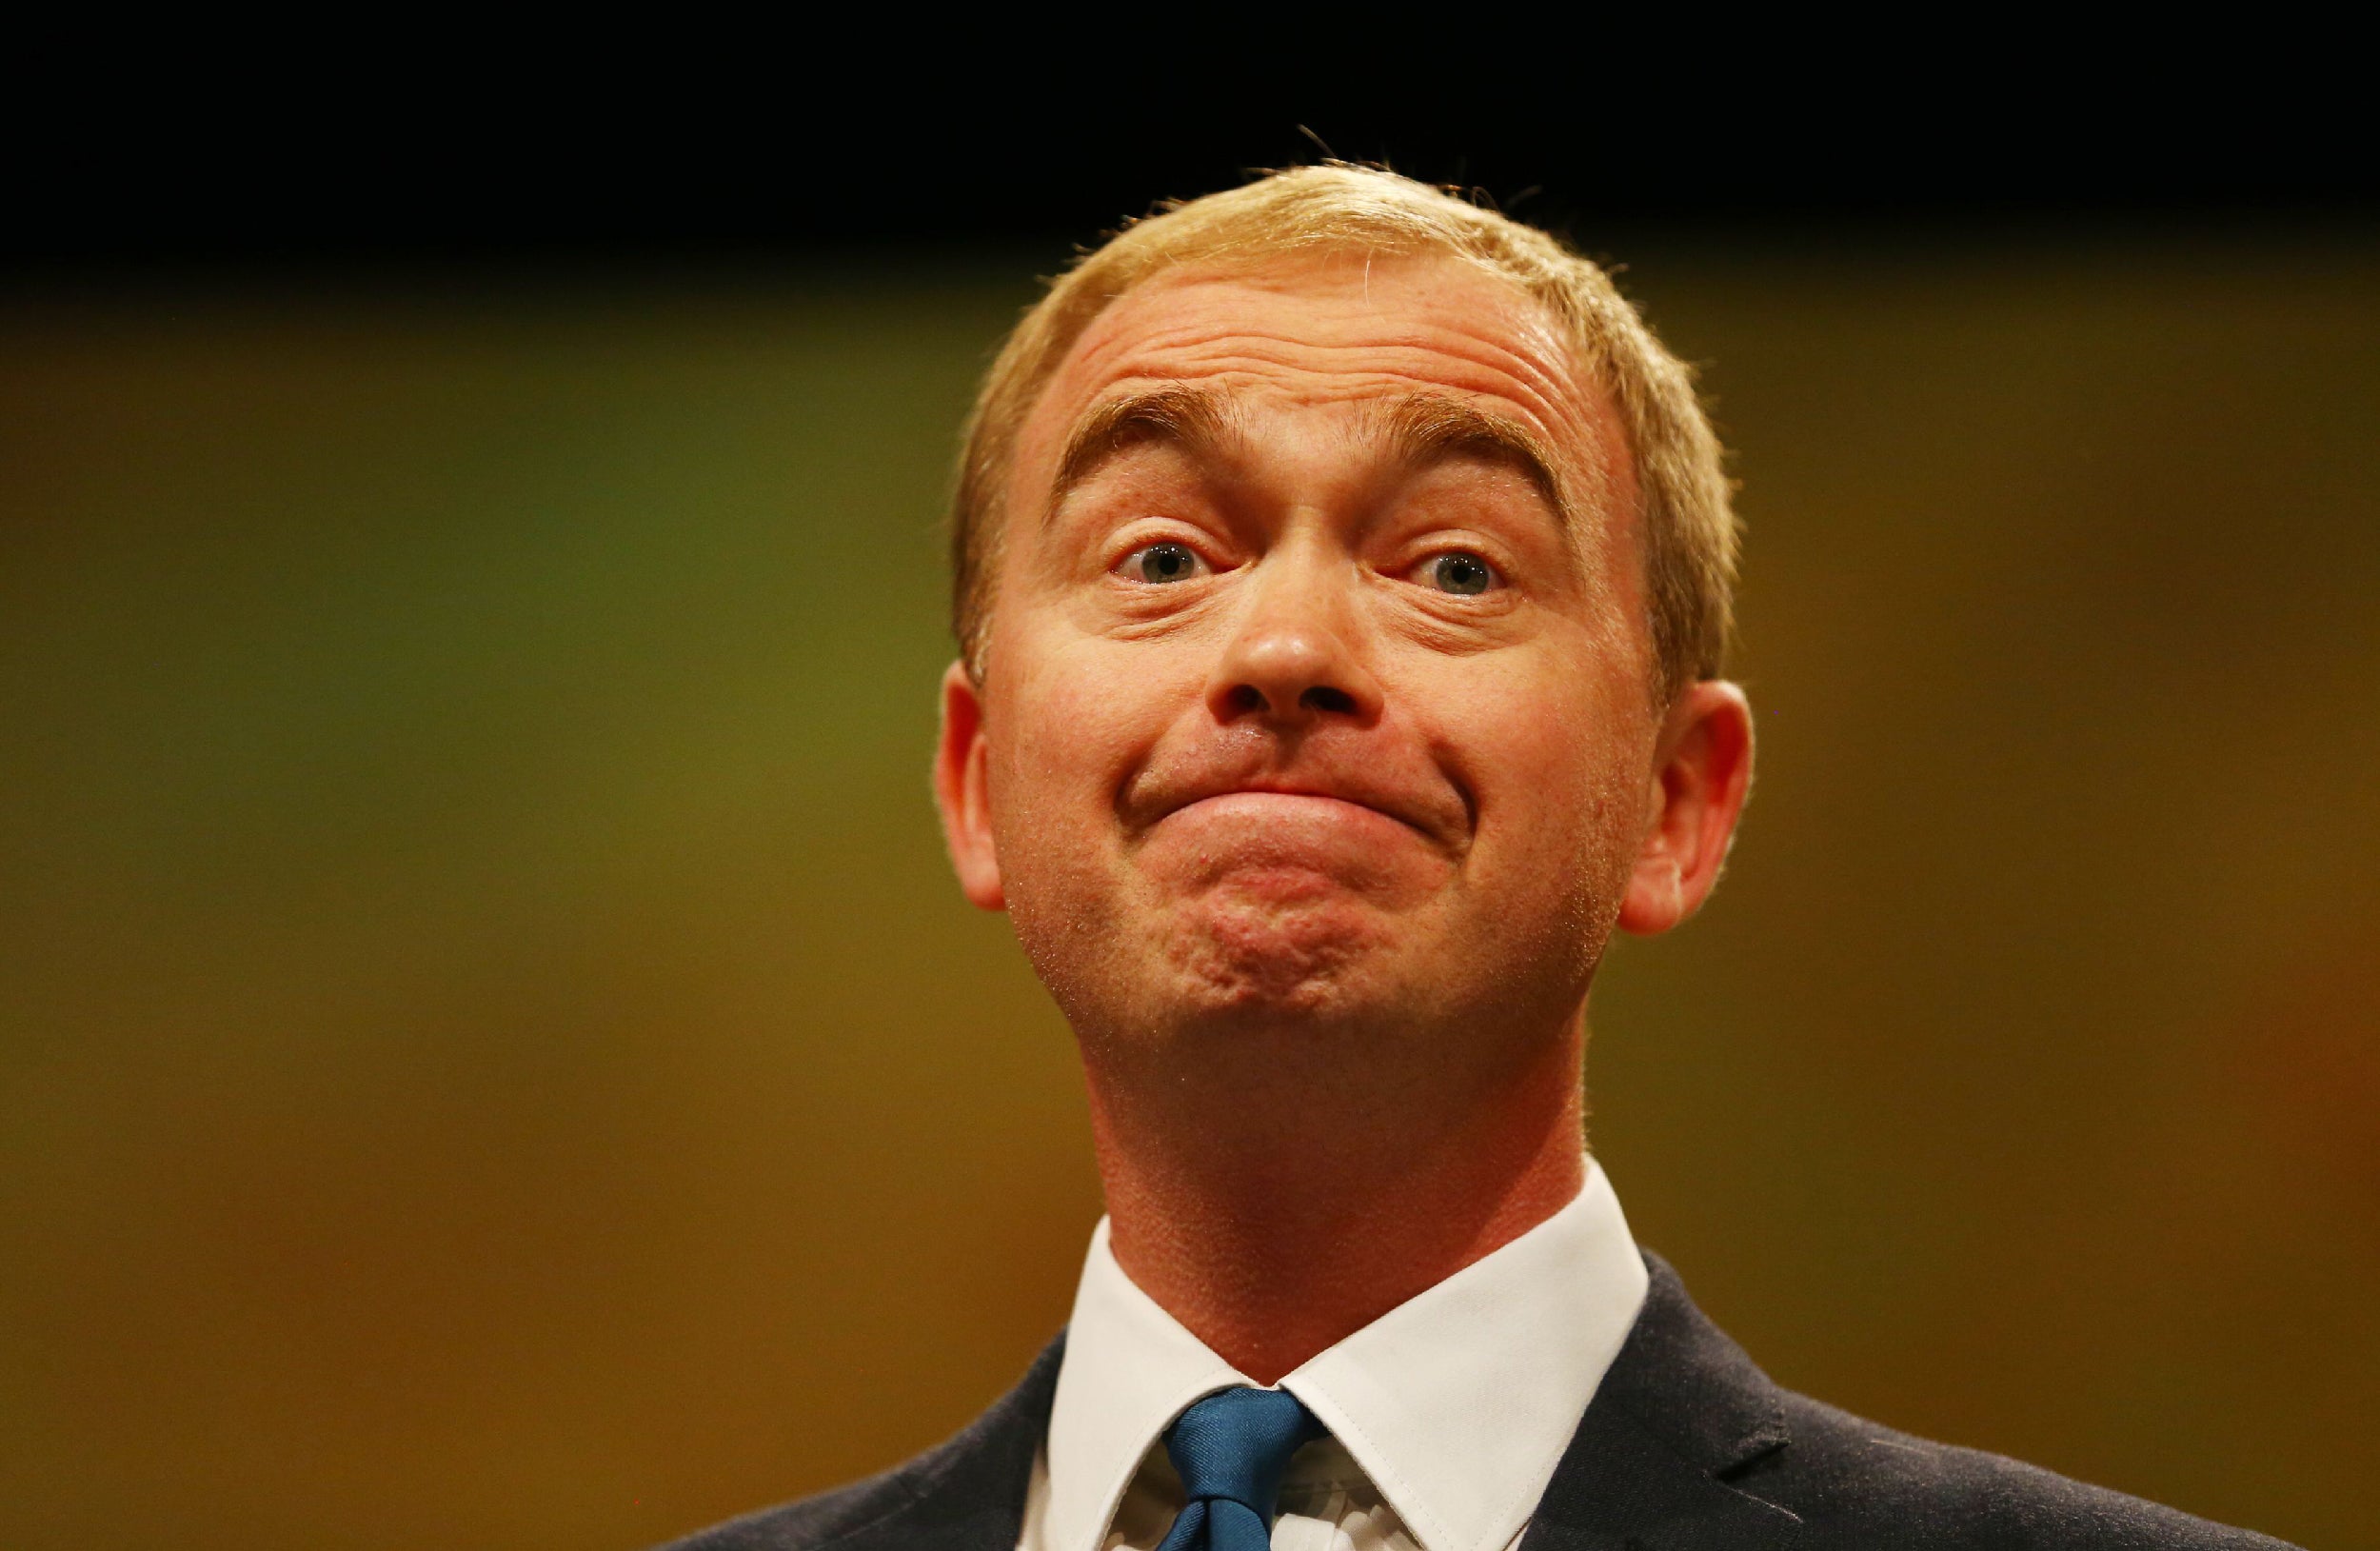 A criminal investigation into payments missing from Tim Farron’s party has been launched